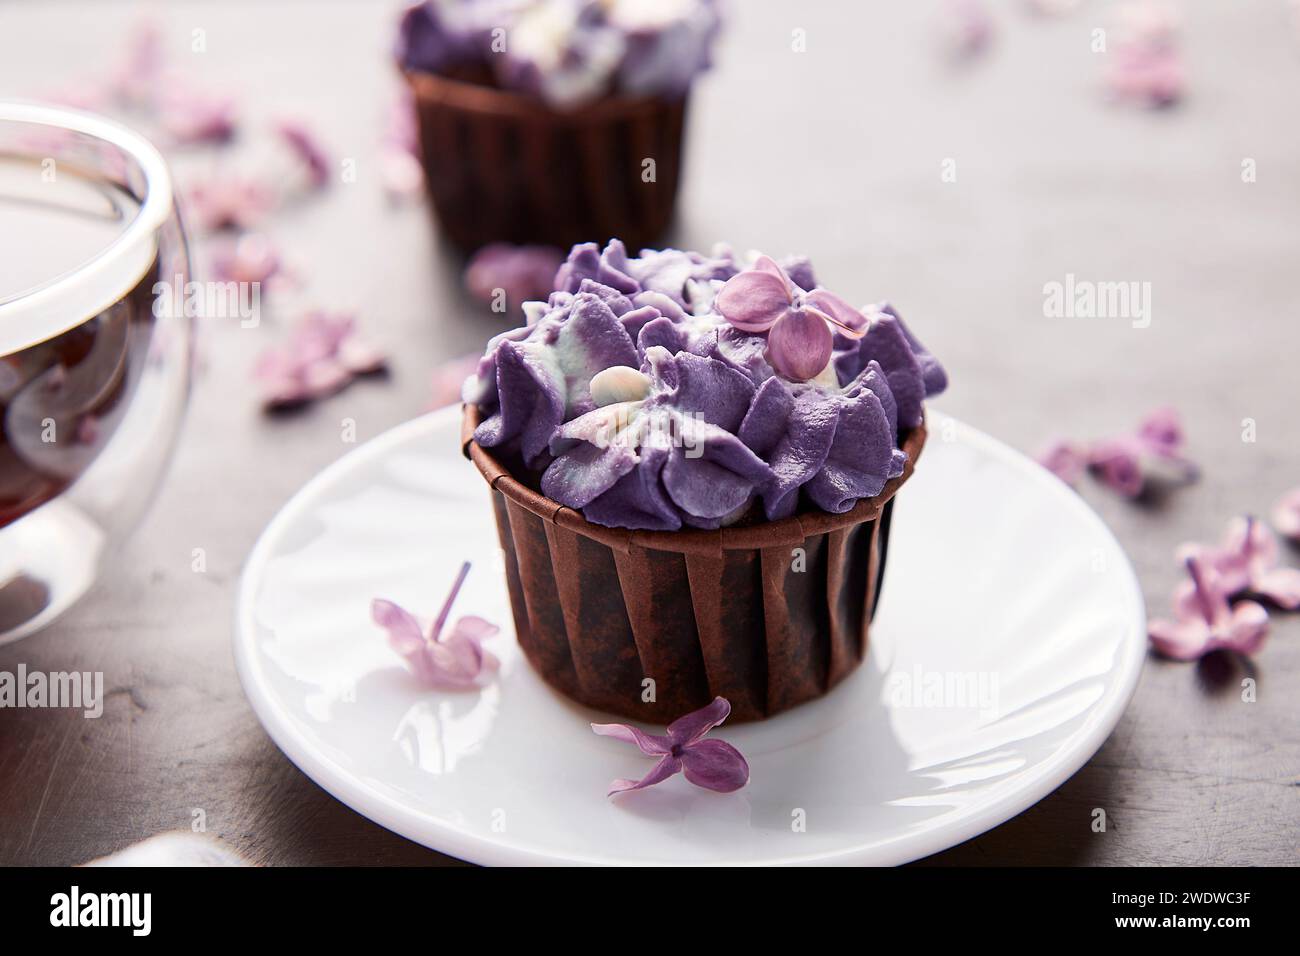 Floral purple cupcake close up using trend Dreamy Escapism. Desserts, coffee and lilac flowers background. Aesthetics food. Stock Photo